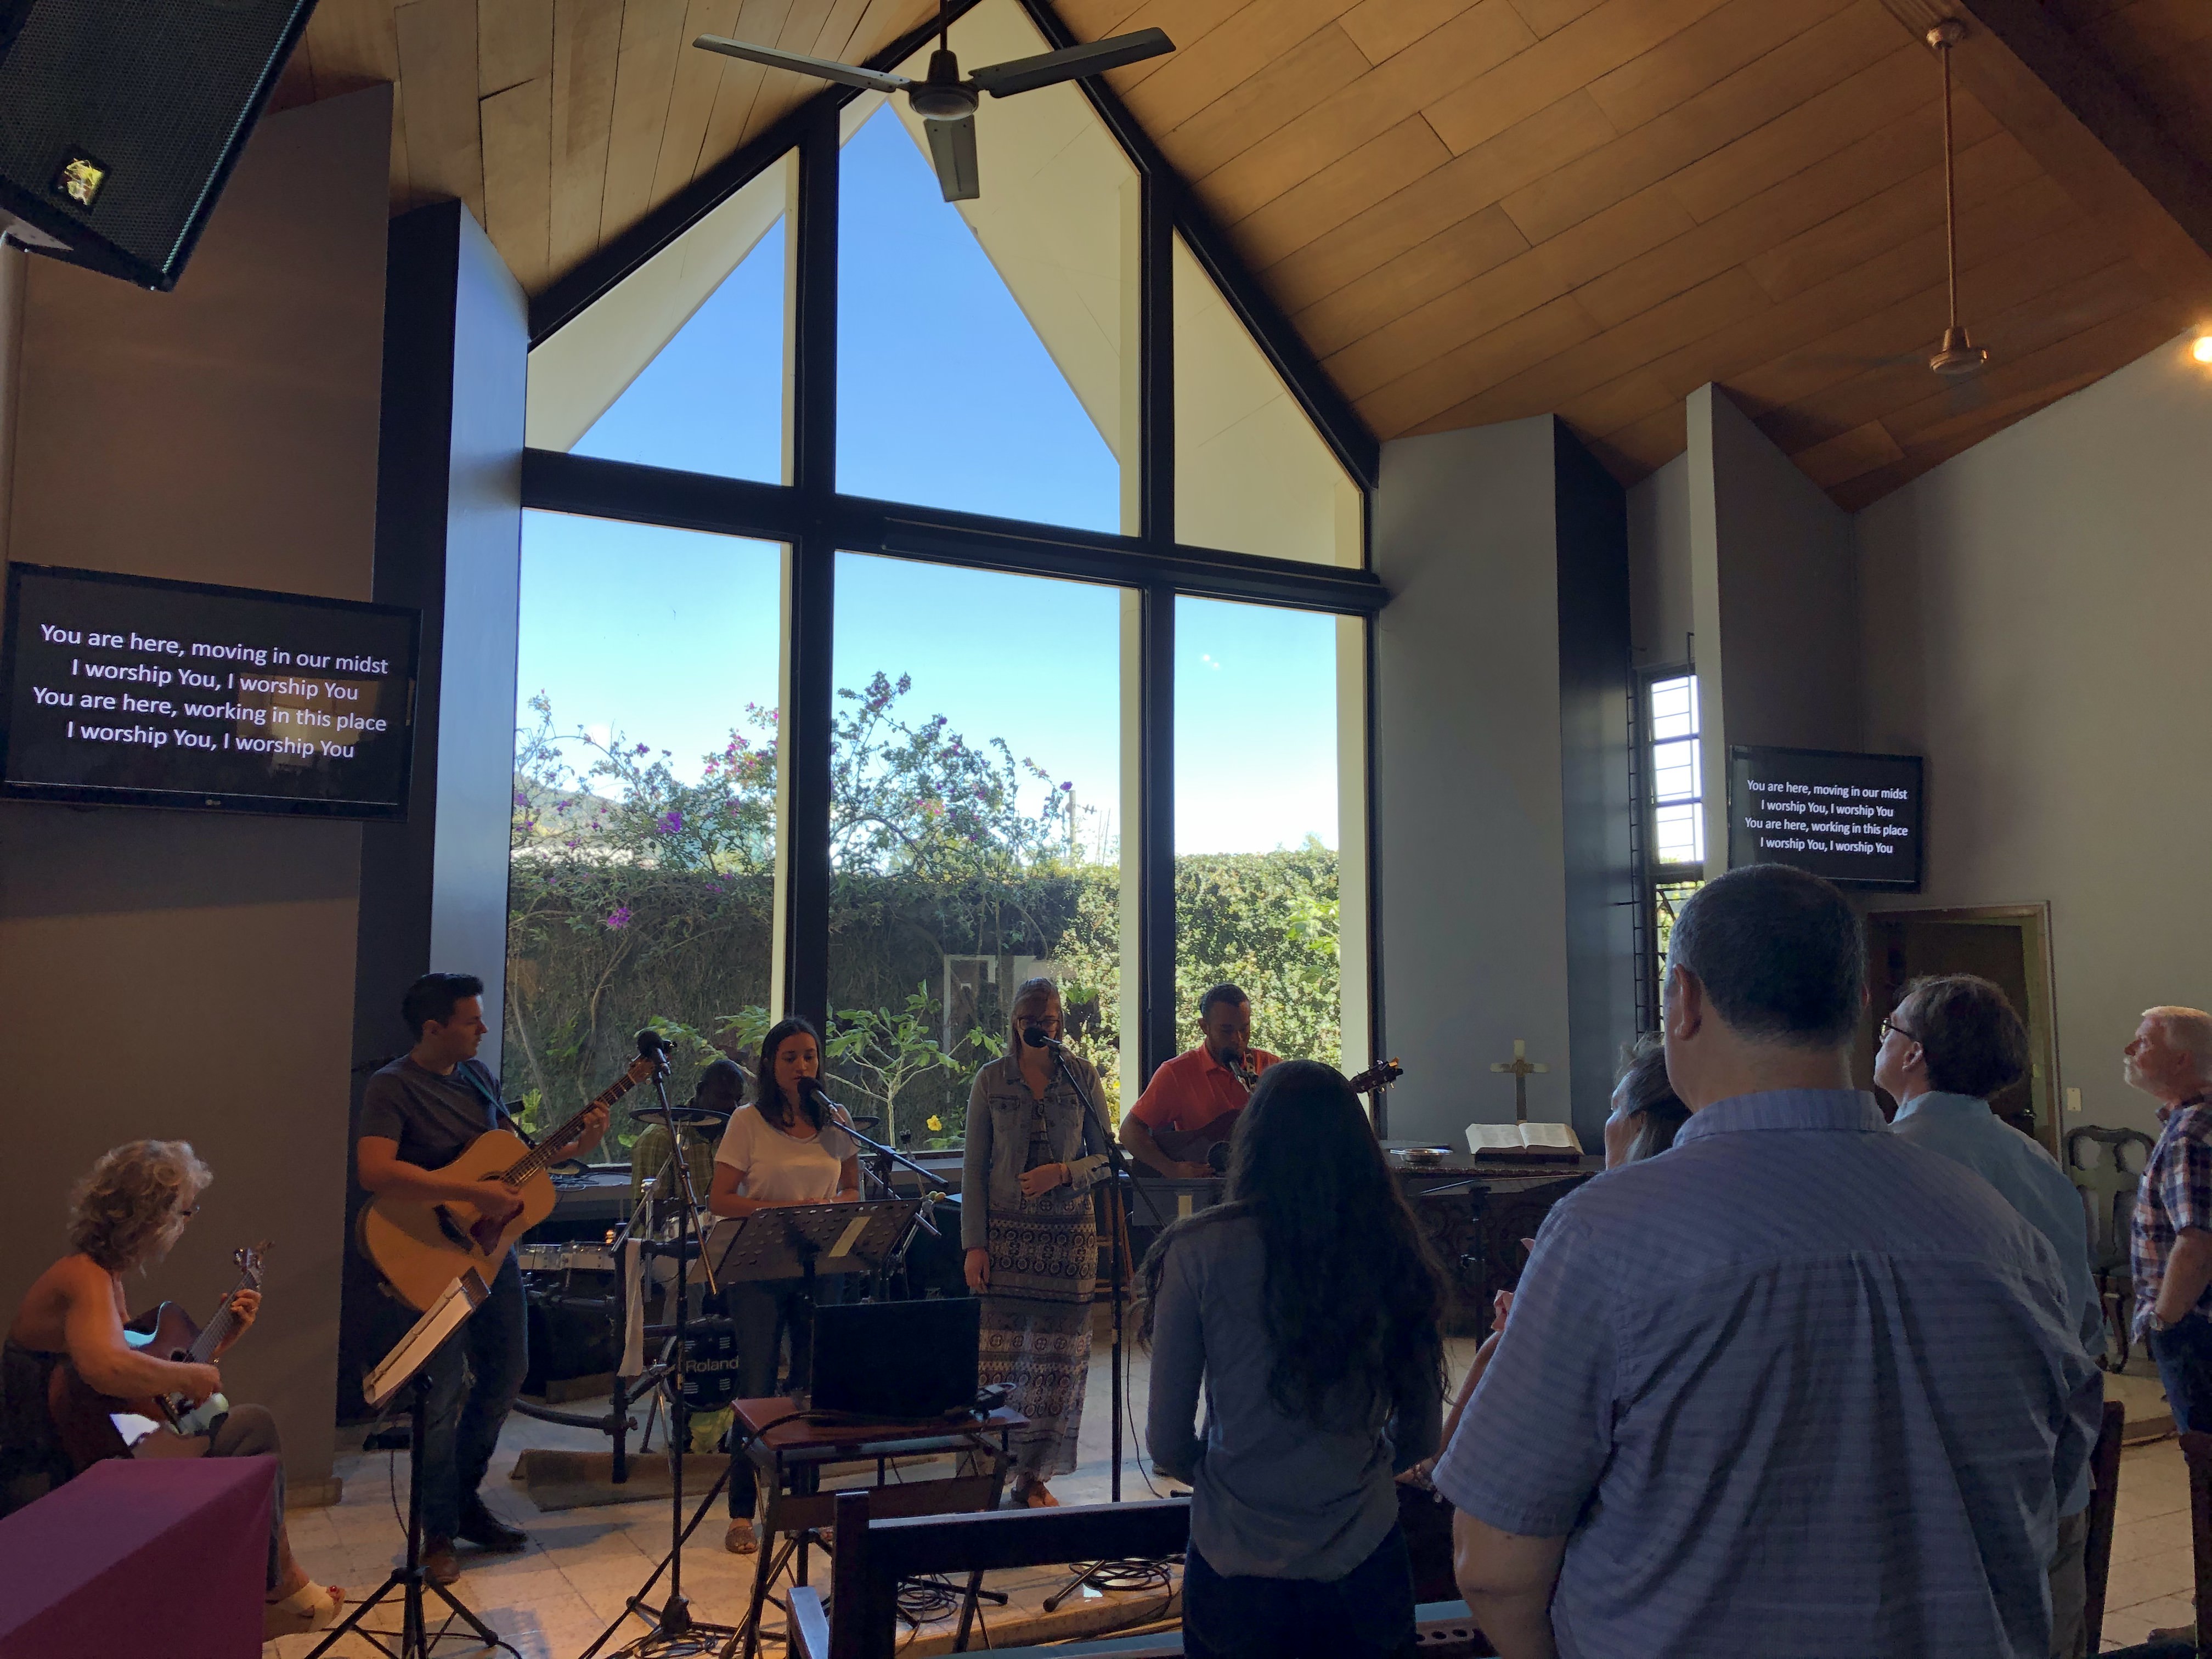 Singing, "You are here, moving in our midst, I worship You, I worship You. You are here, working in this place, I worship You, I worship You."